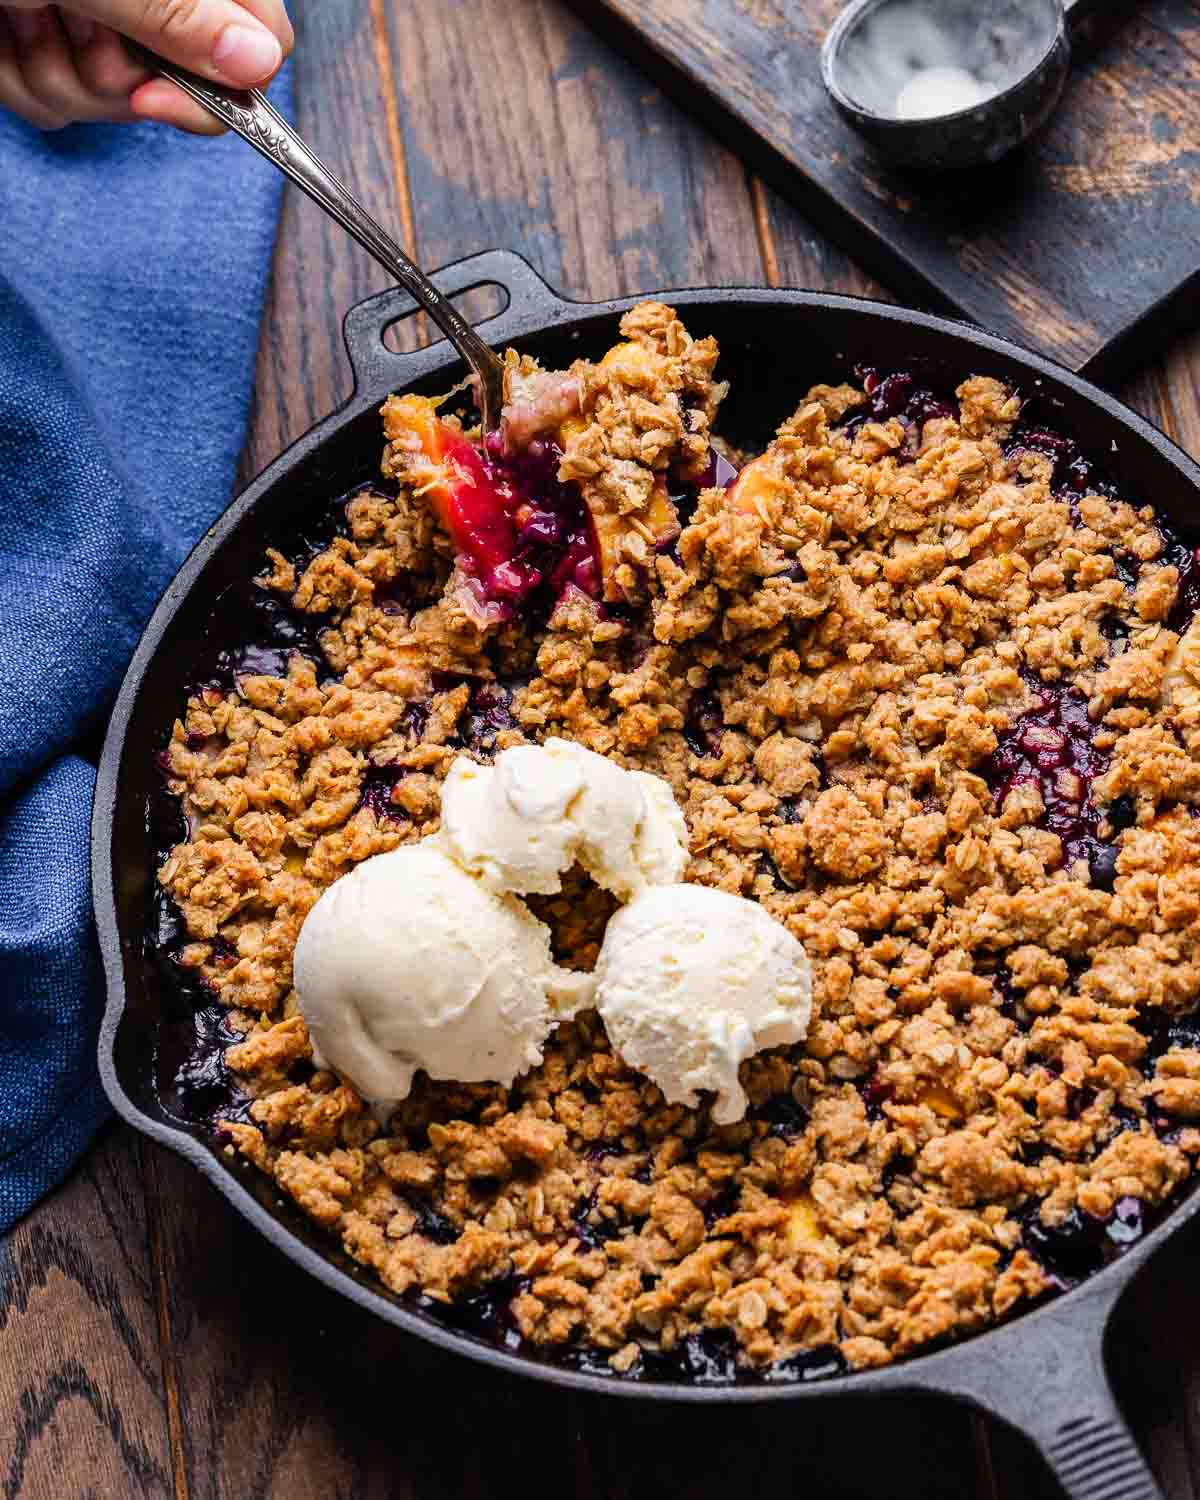 Peach blueberry crisp in cast iron pan on table with spoon scooping out some of it.